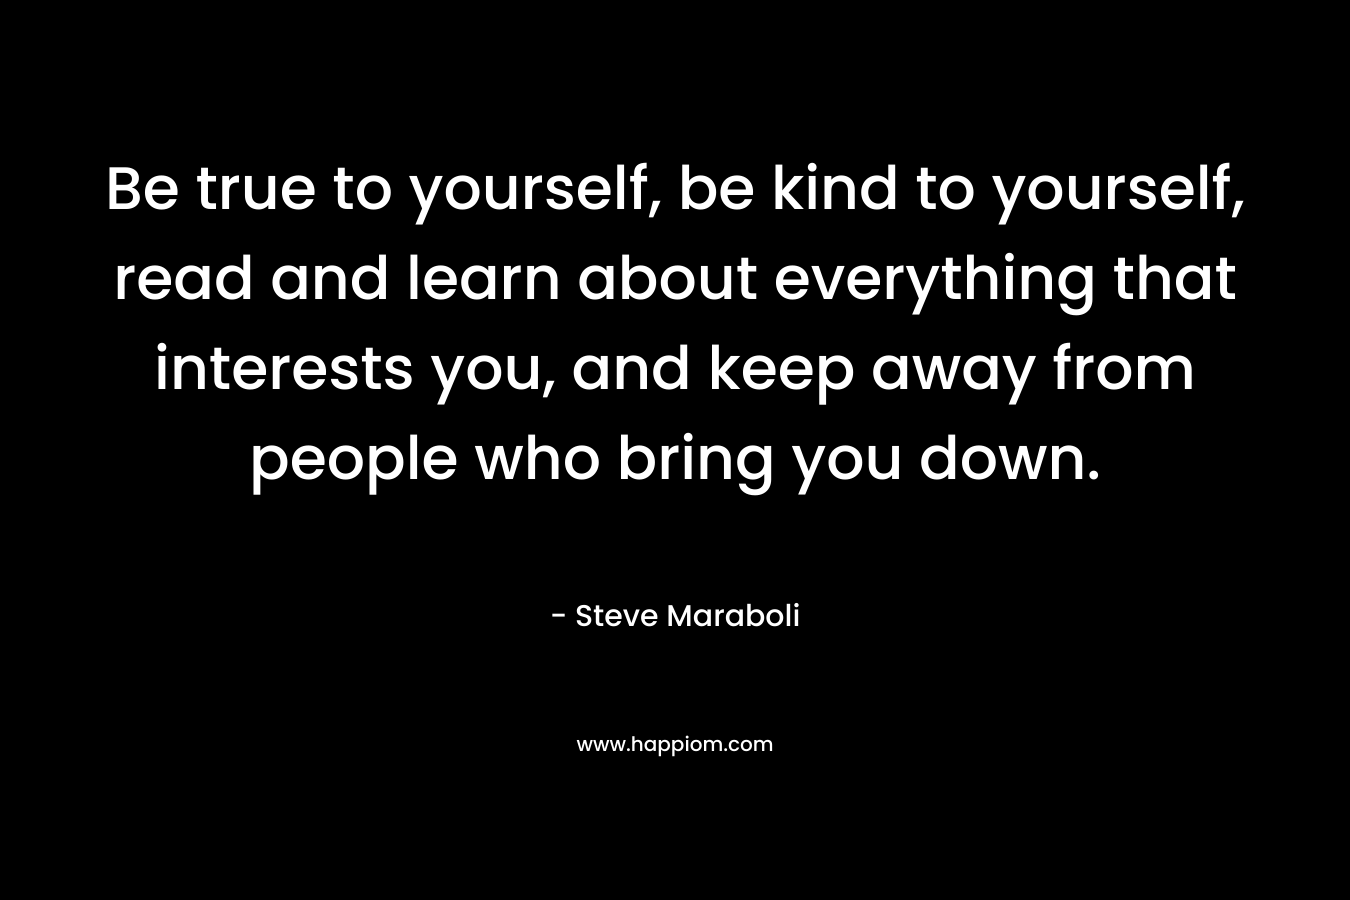 Be true to yourself, be kind to yourself, read and learn about everything that interests you, and keep away from people who bring you down.